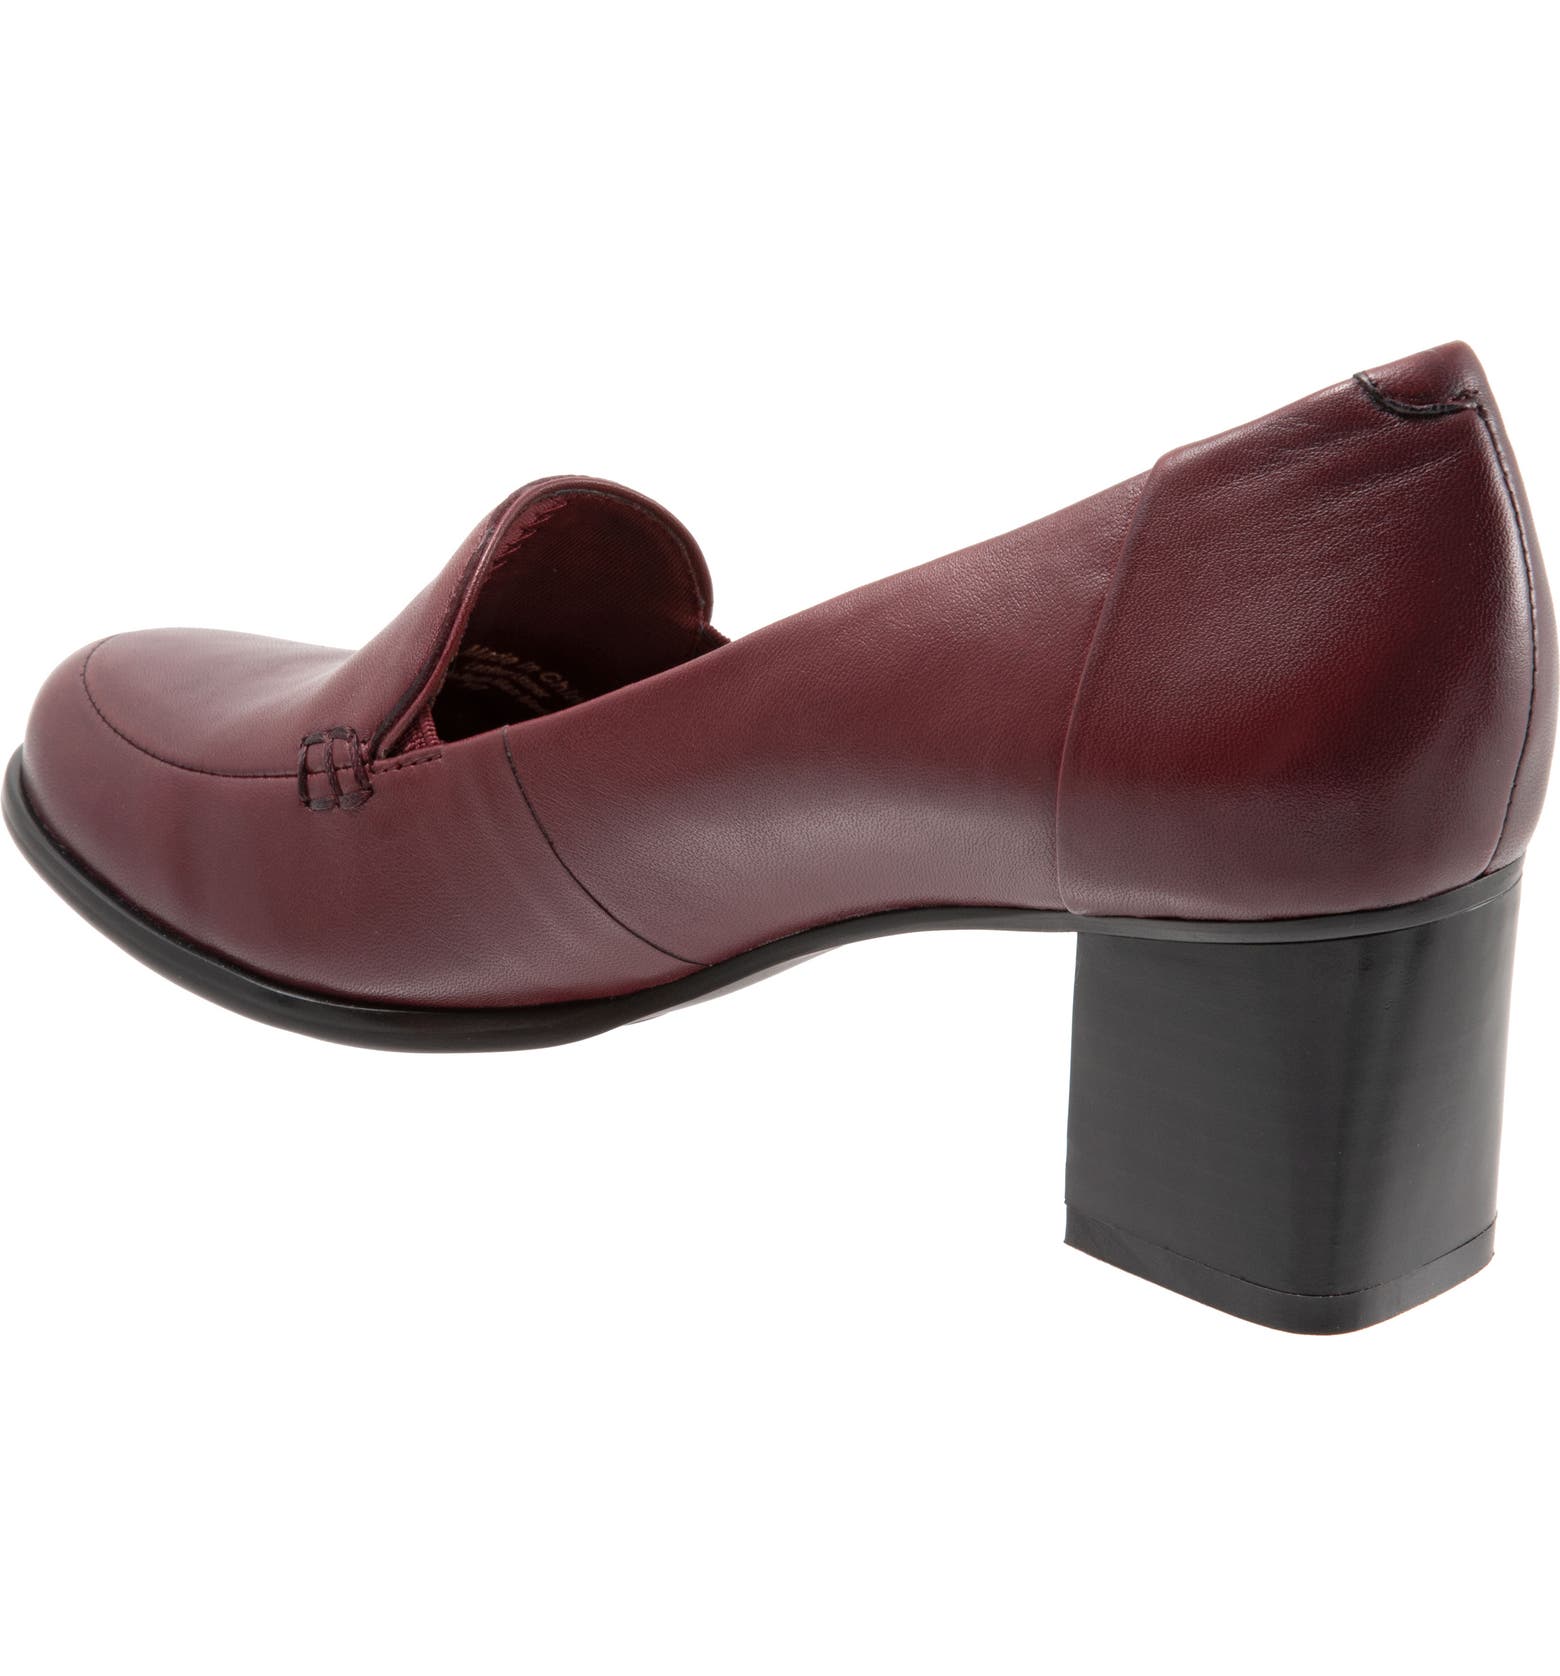 Trotters Quincy Loafer Pump (Women) | Nordstrom